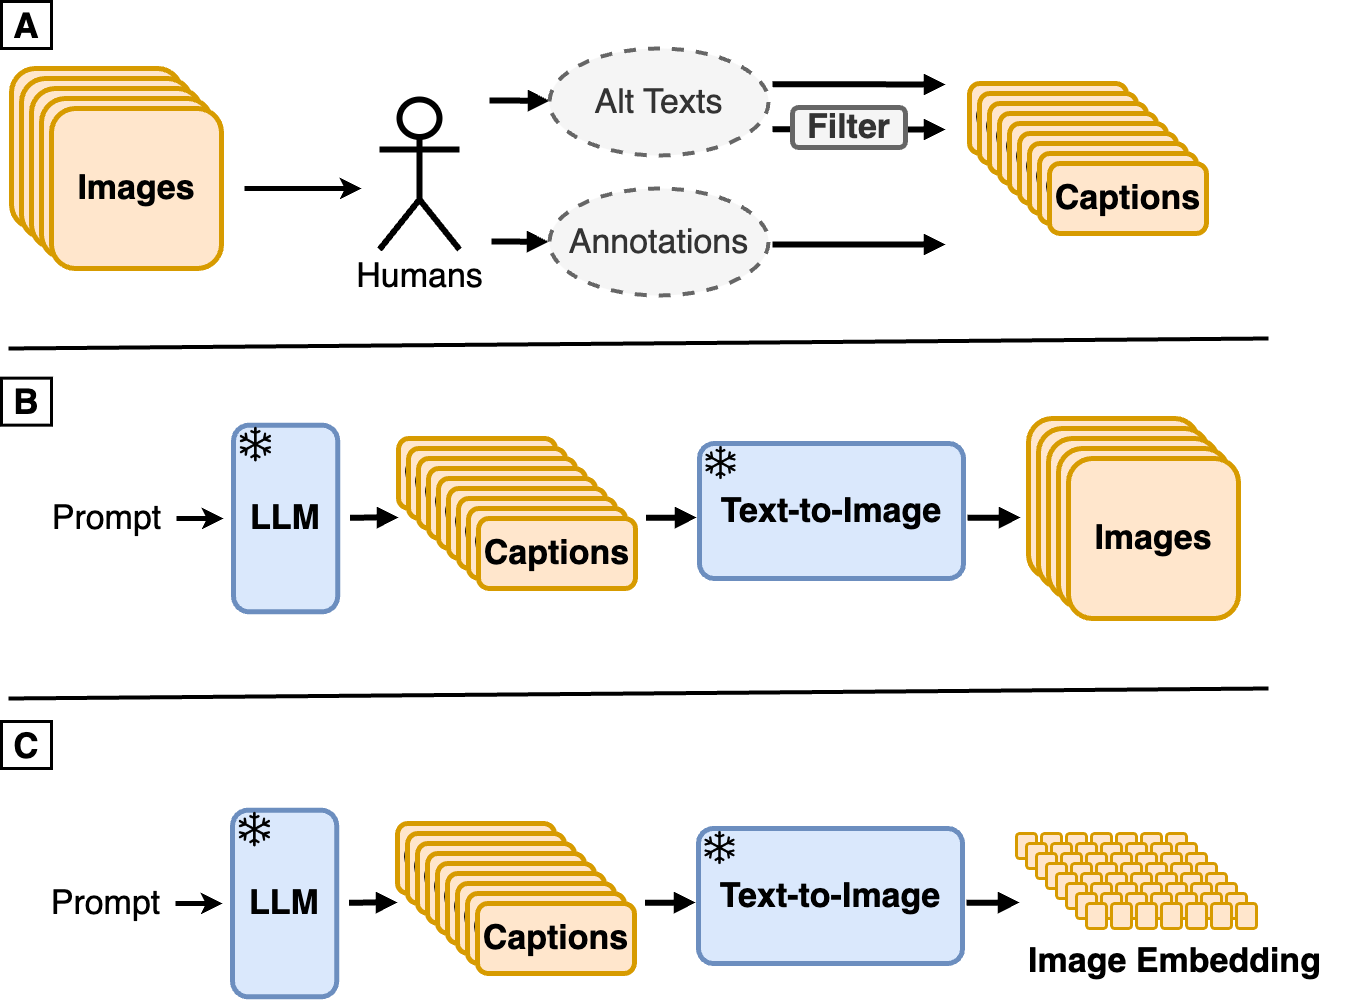 Synth$^2$: Boosting Visual-Language Models with Synthetic Captions and Image Embeddings